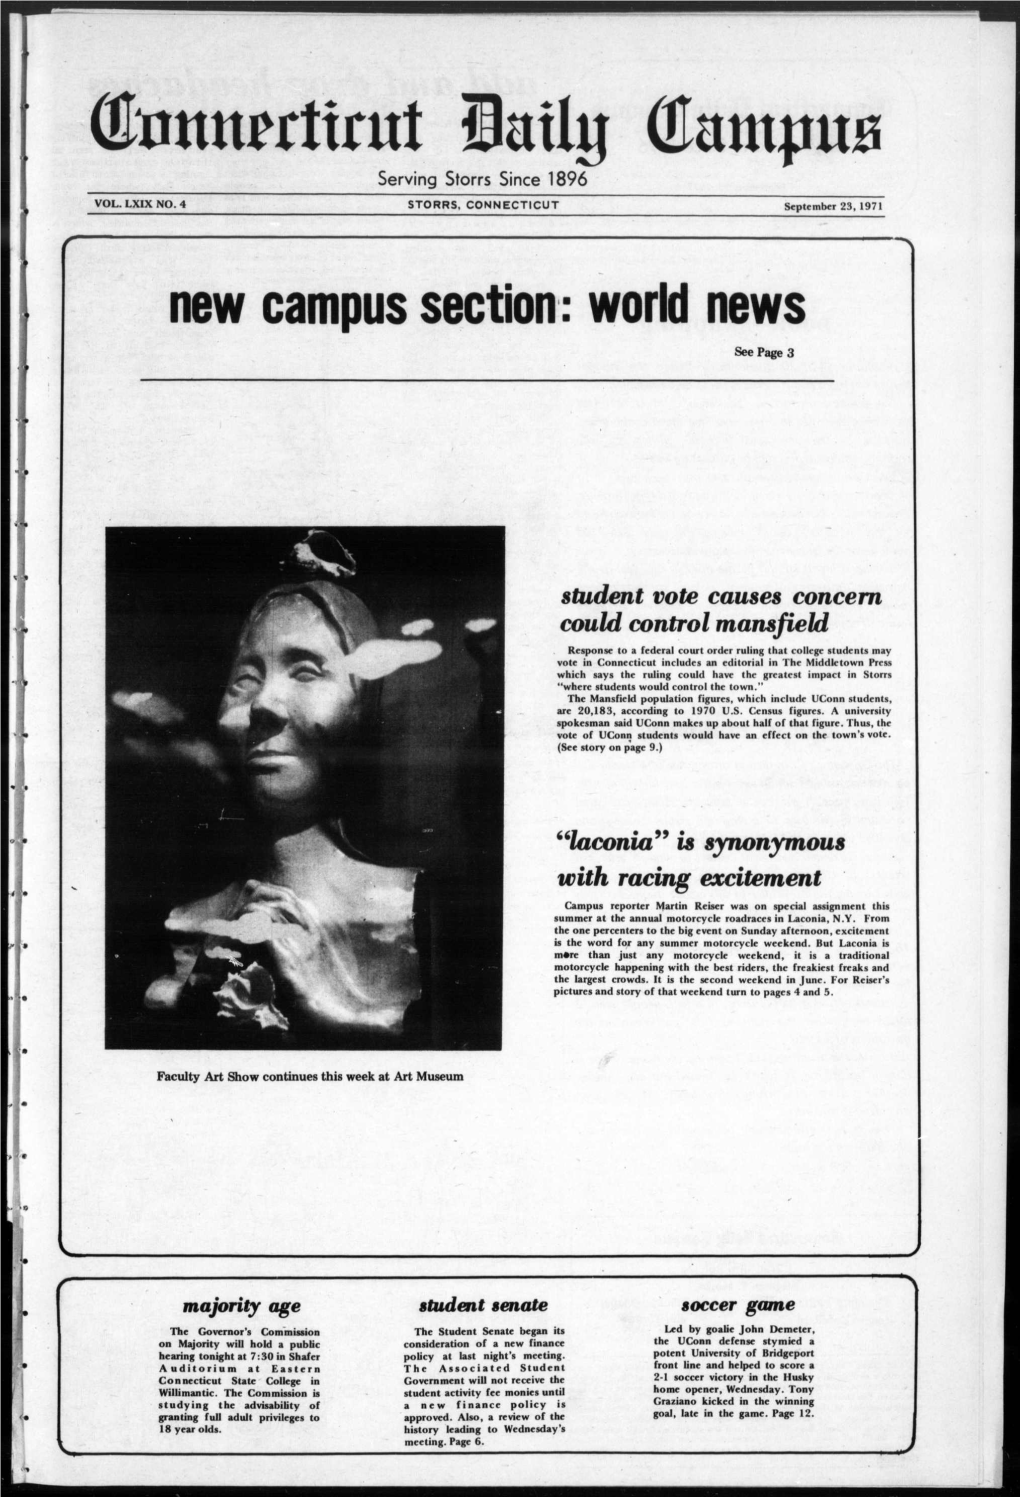 New Campus Section: World News See Page 3